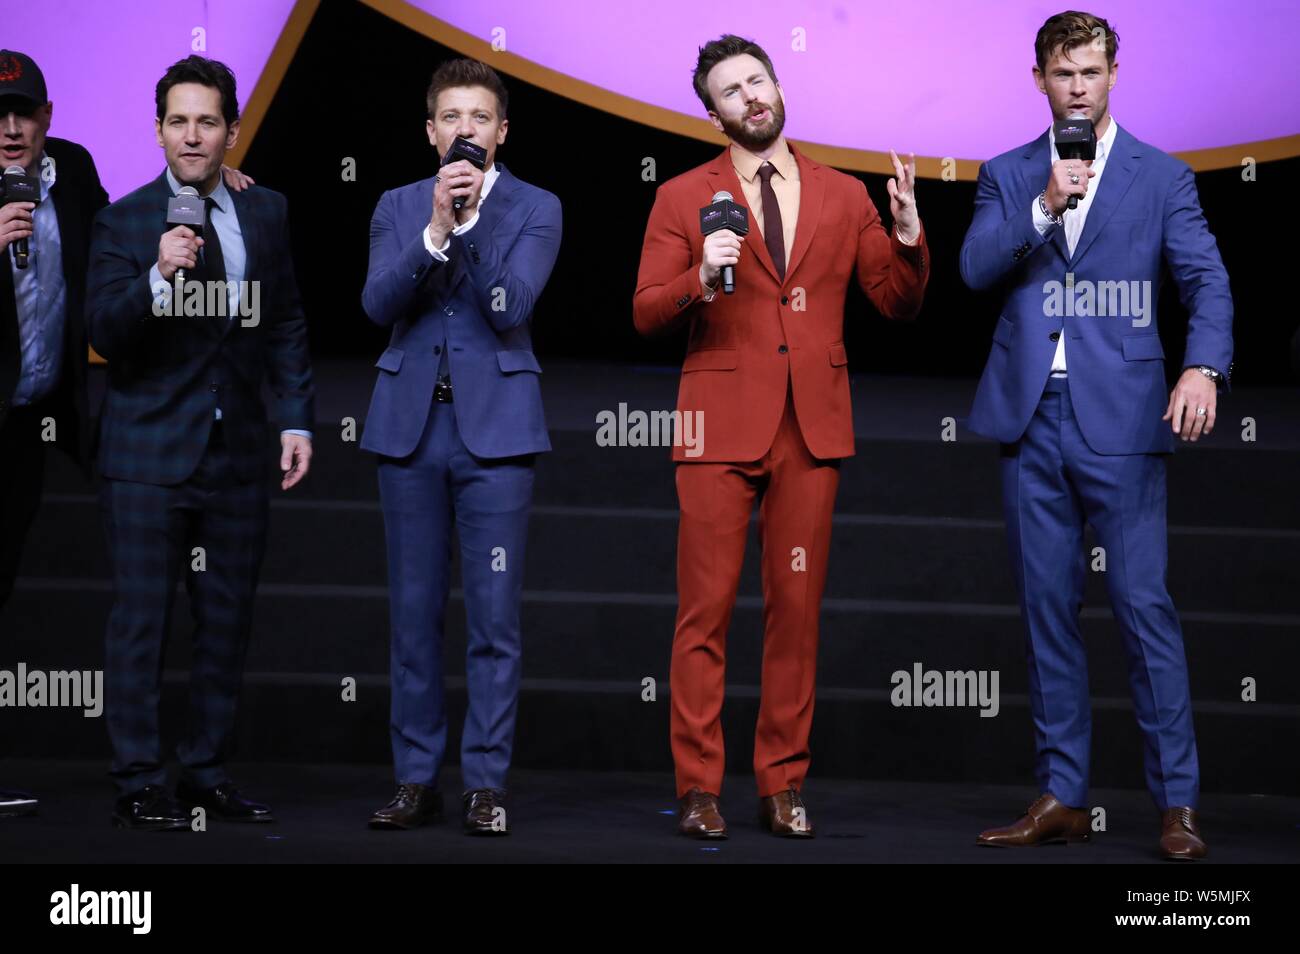 (From left) Paul Rudd, Jeremy Renner, Chris Evans and Chris Hemsworth attend a premiere event for the movie 'Avengers: Endgame' in Shanghai, China, 18 Stock Photo